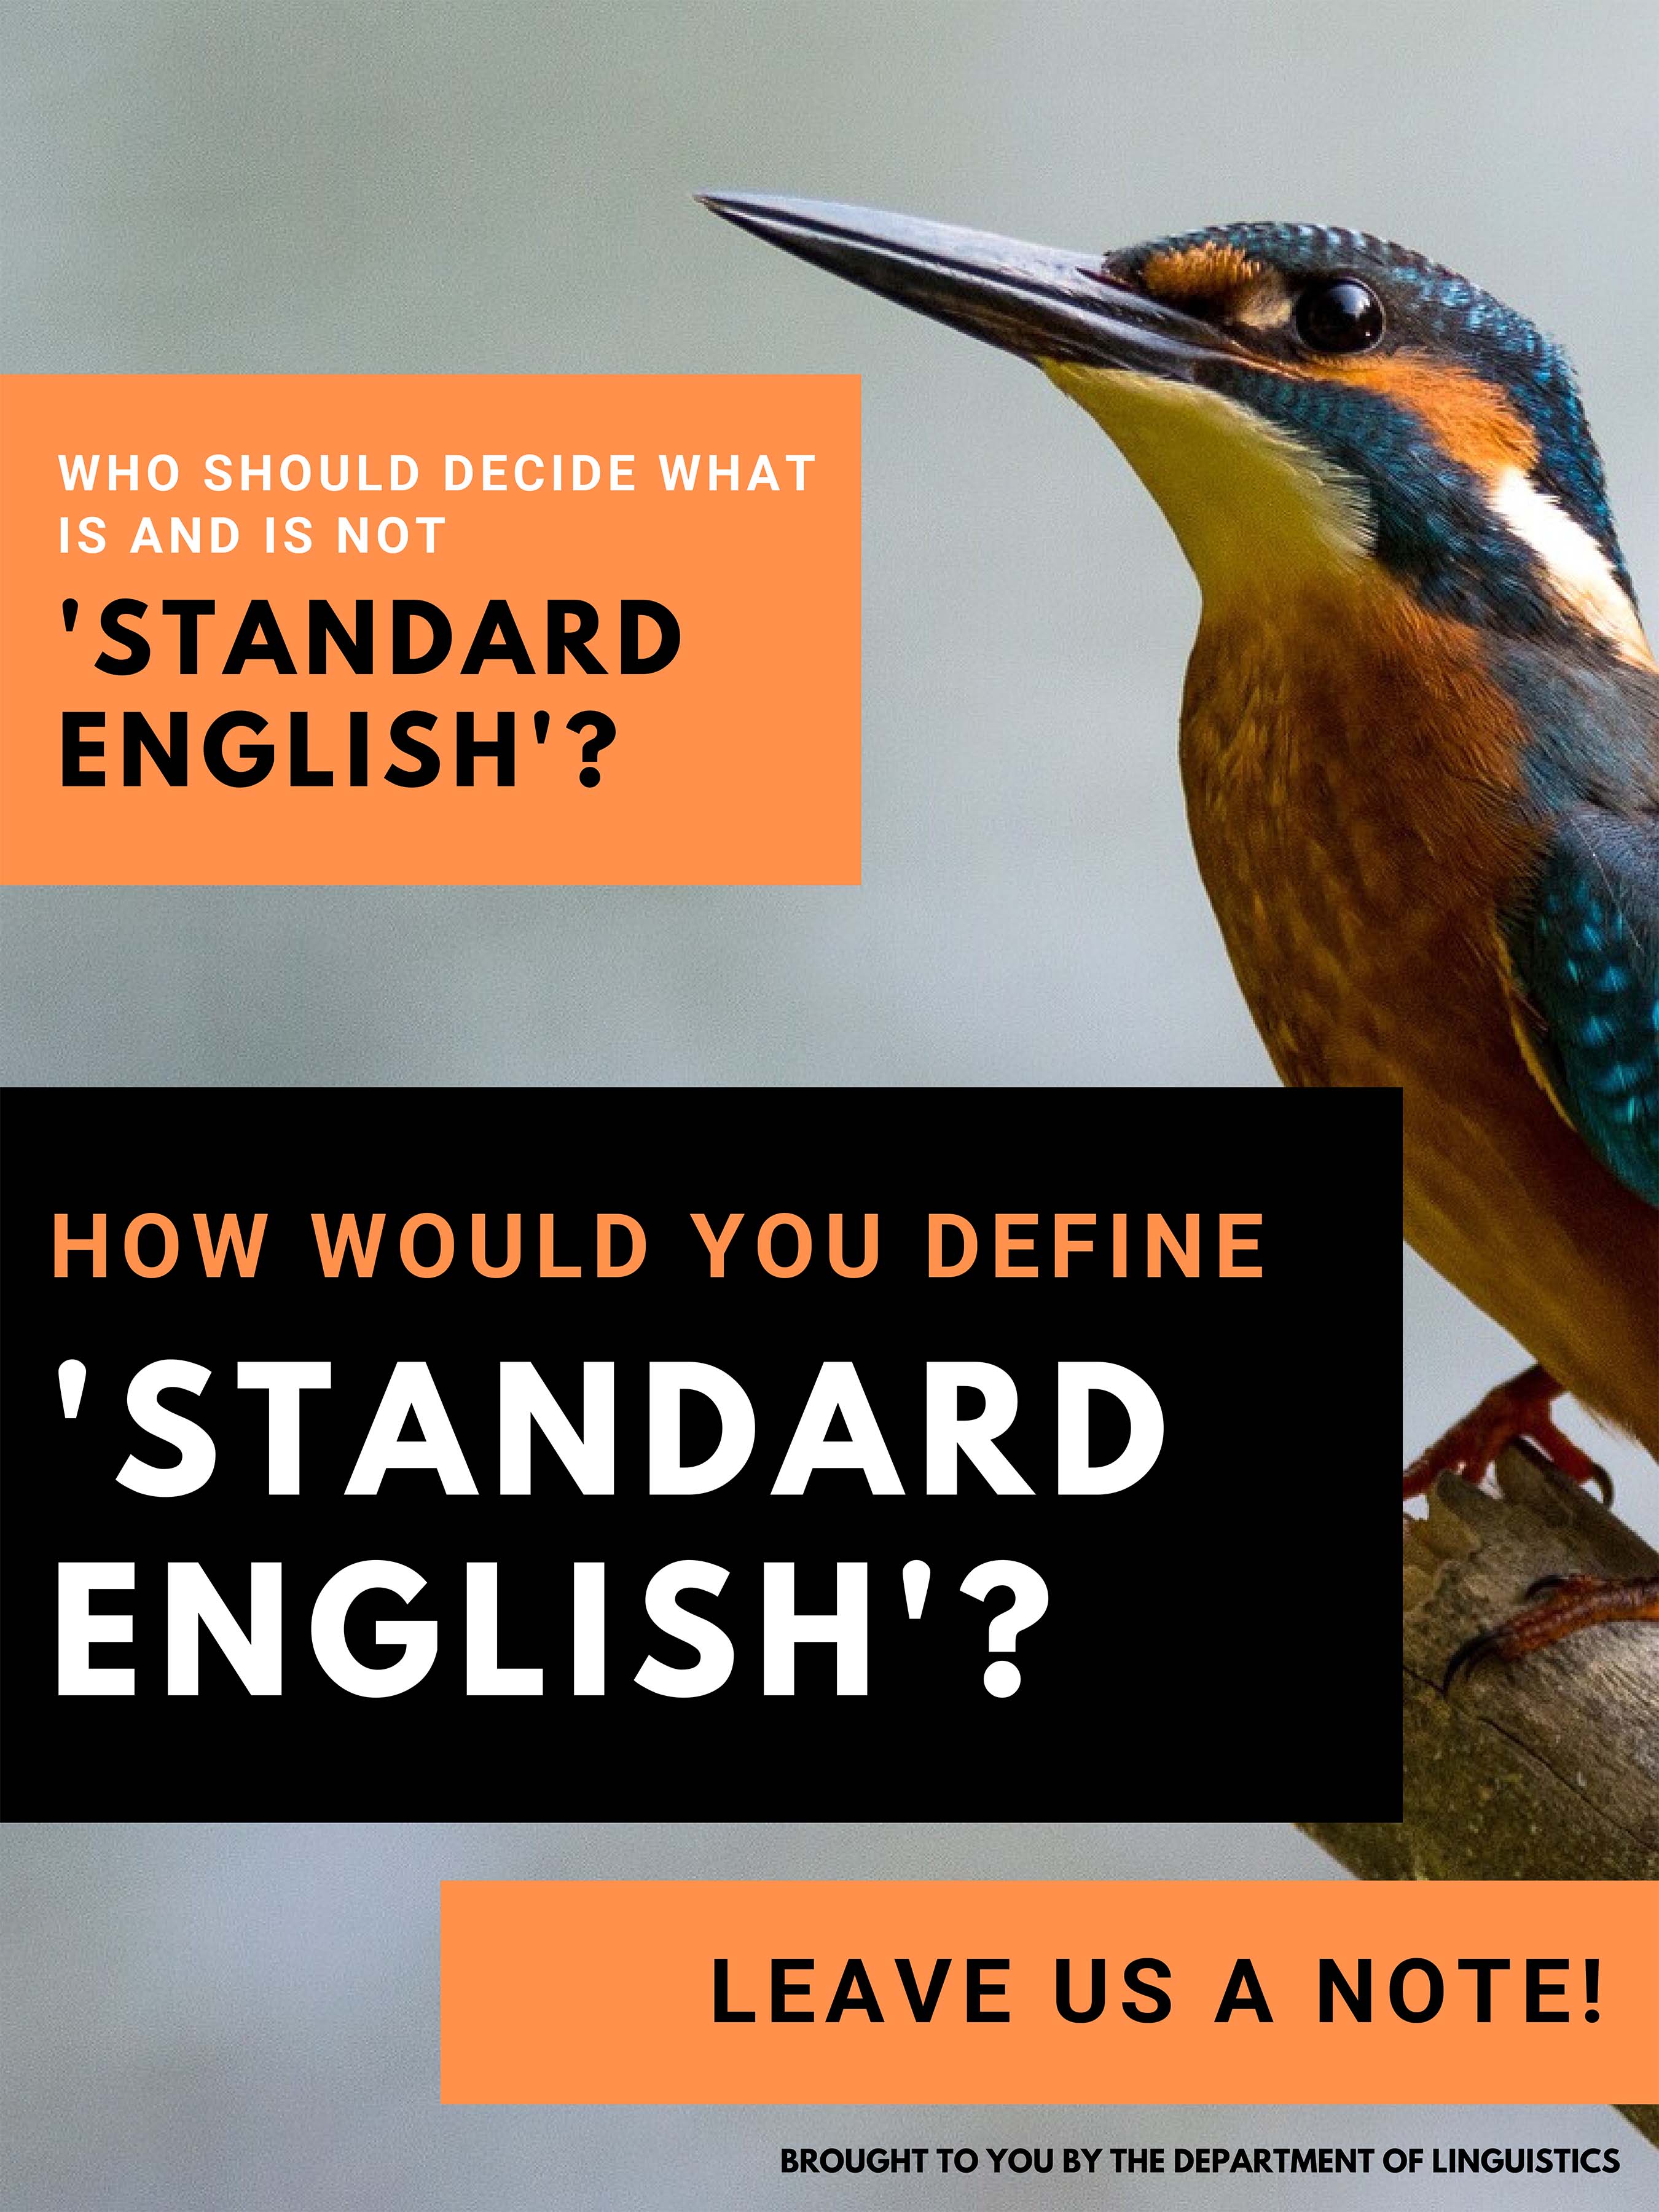 Who should decide what is and is not 'standard English'? Click on image to see full description.